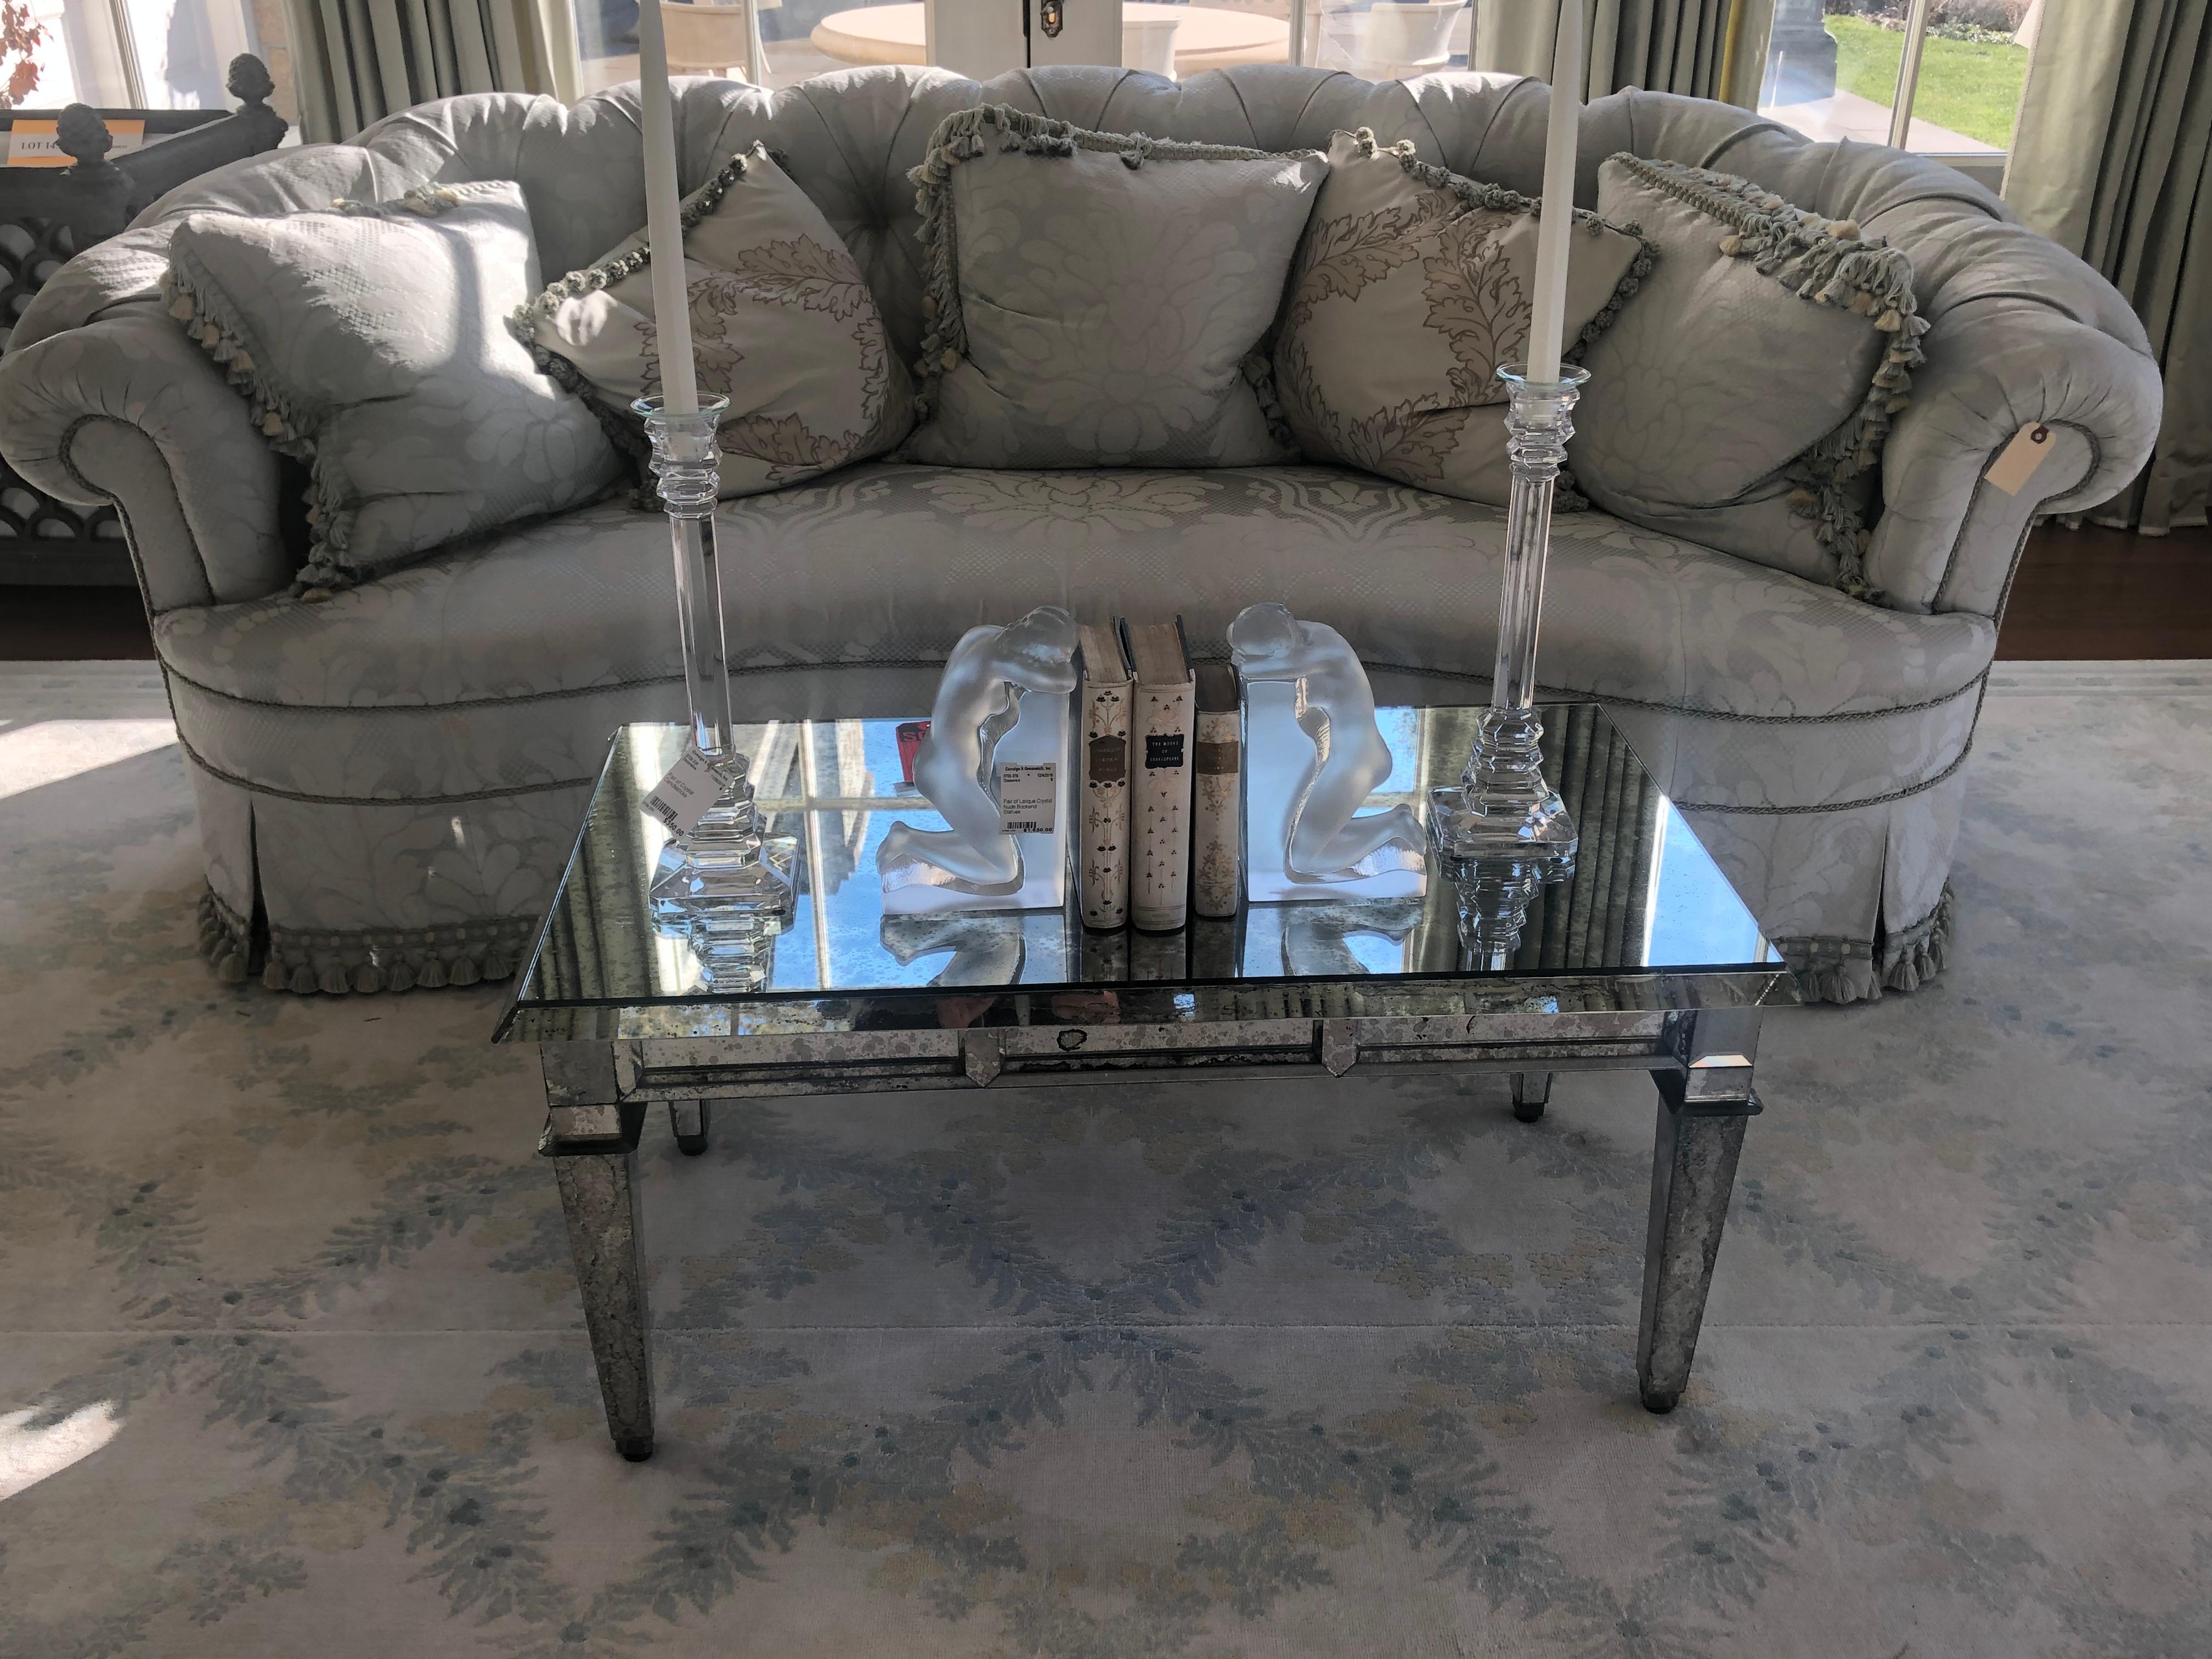 Fine antiqued mirror glass coffee table in Hollywood Regency style. This is a stunning antiqued mirror coffee or low table recently purchased from a fine Greenwich CT Mansion. All of the mirrored pieces are separately cut and inserted in a wooden